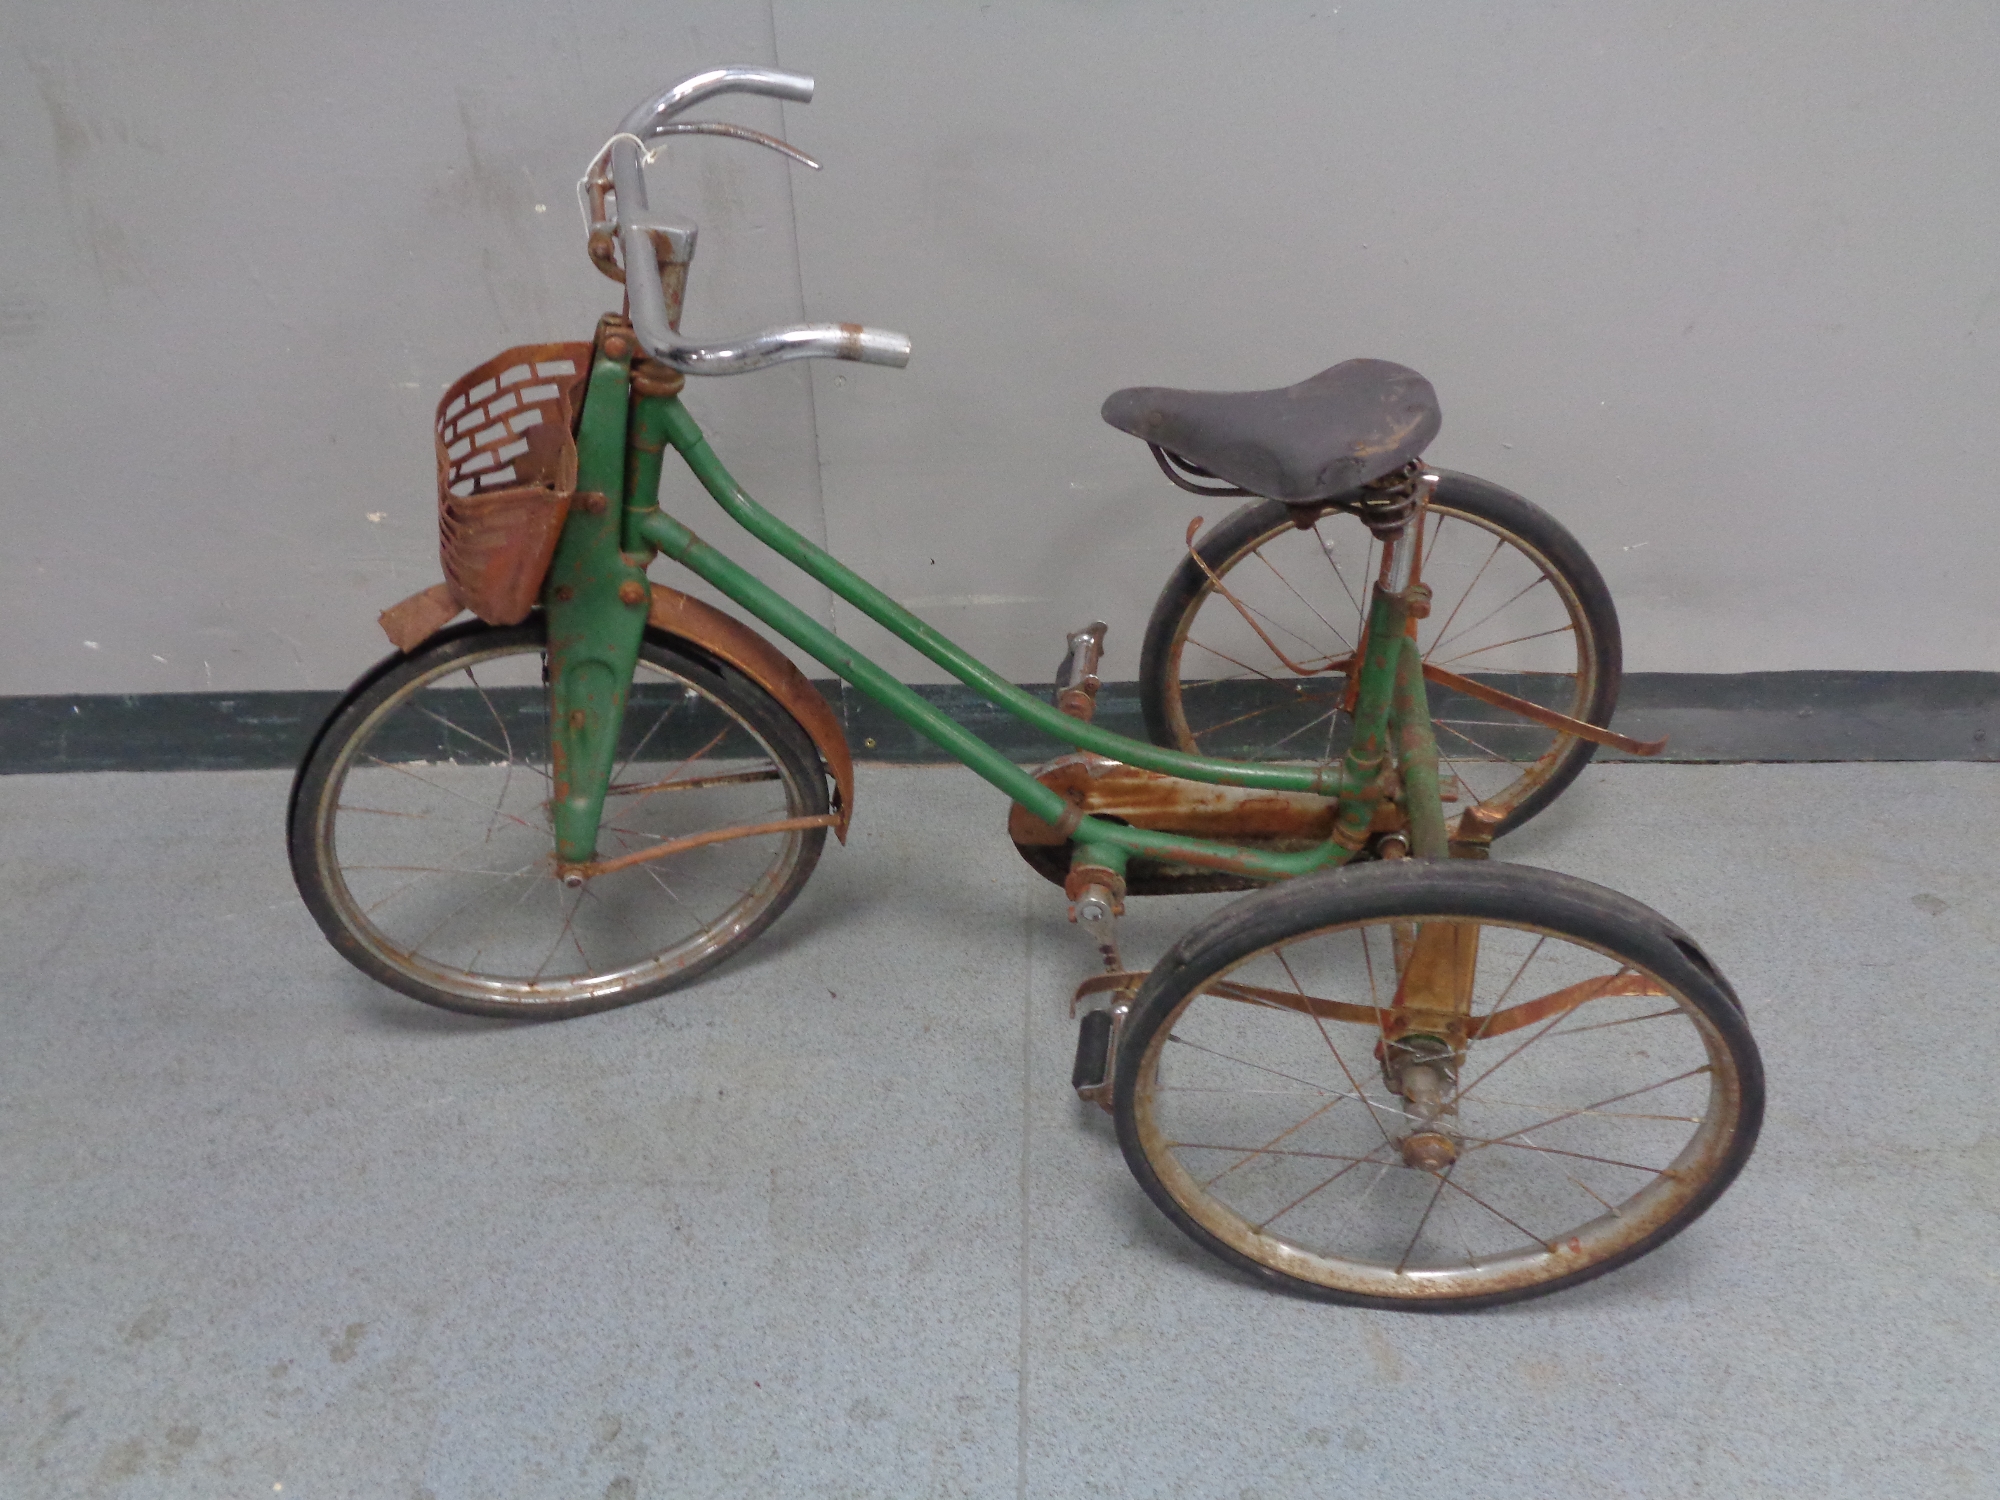 A 20th century child's tricycle with sprung seat